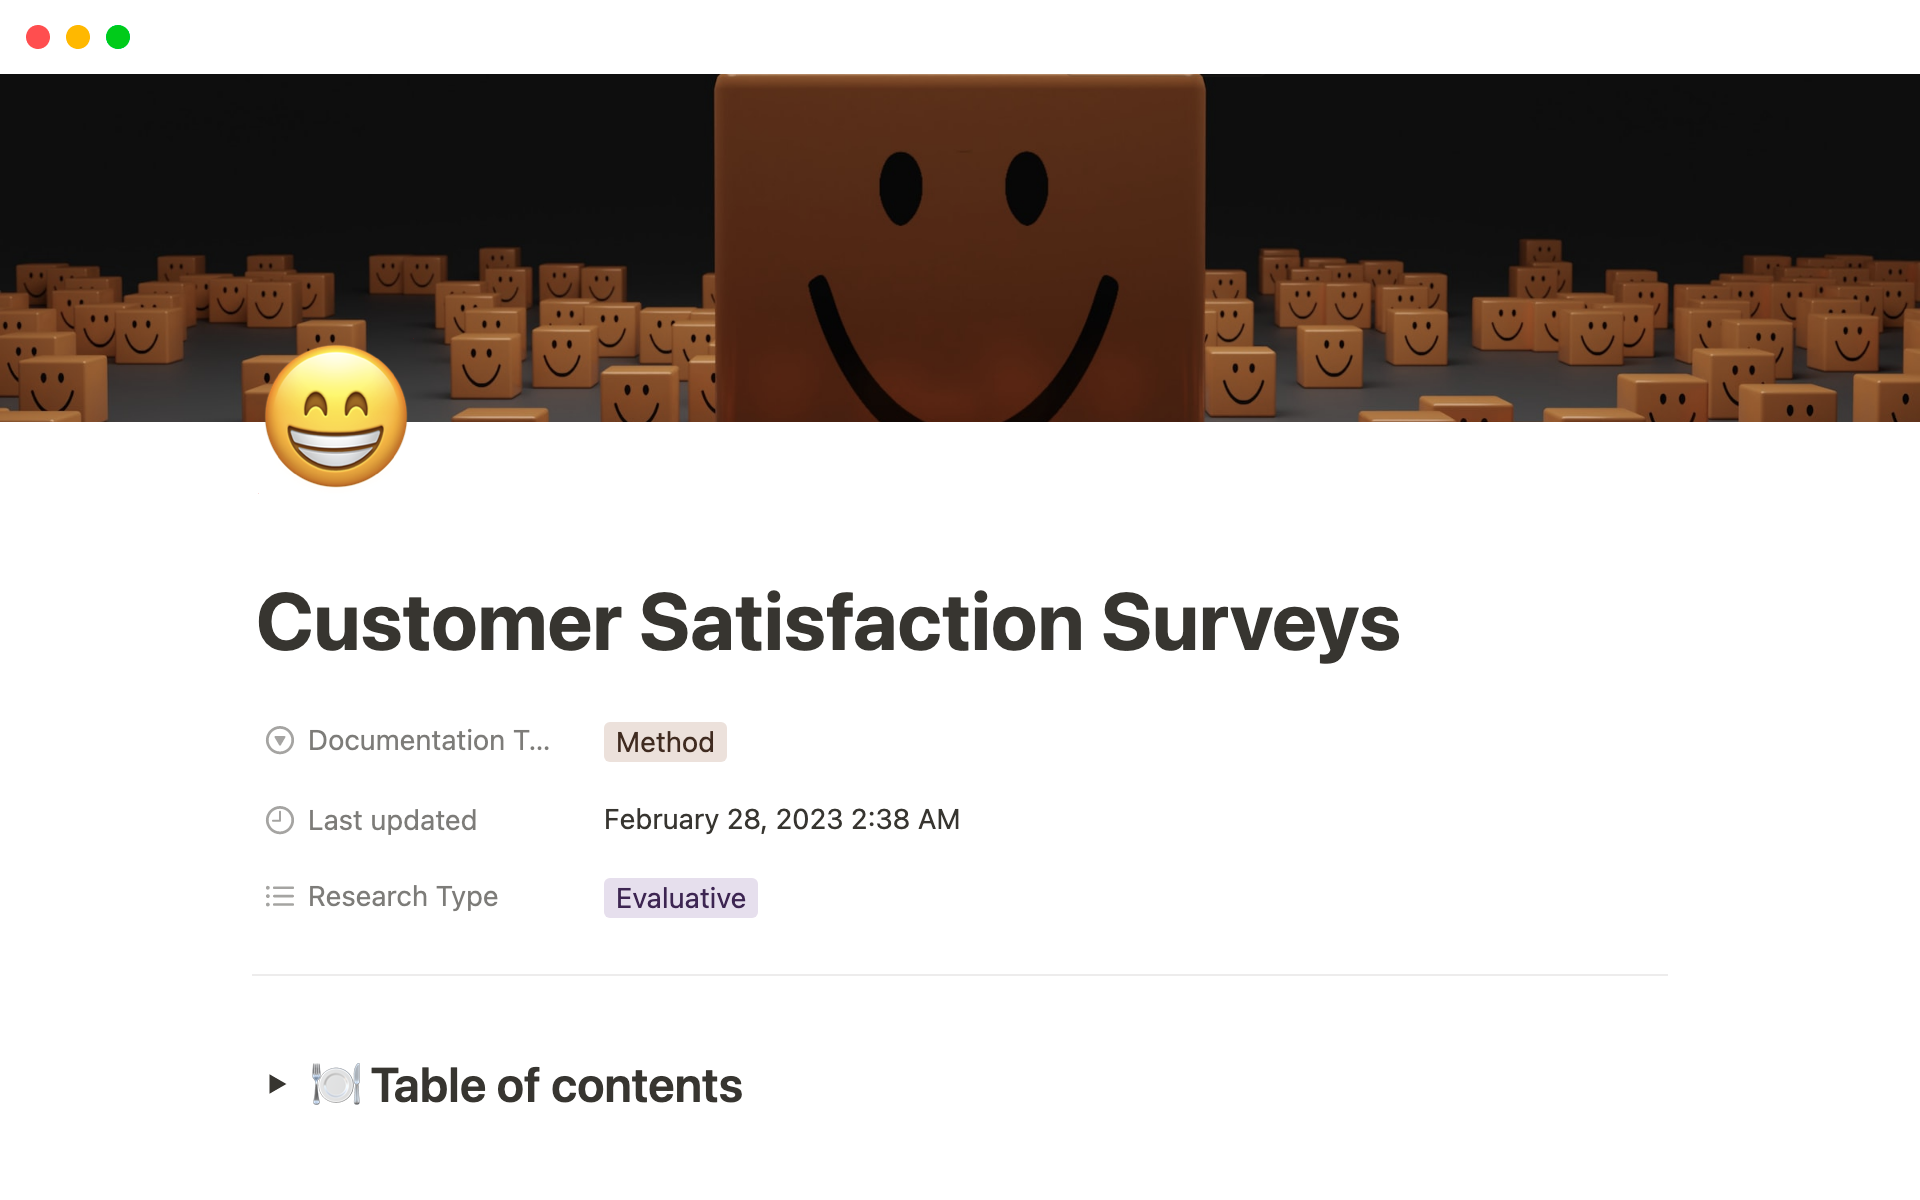 A template for UX Researchers who want to regularly send out surveys to measure the satisfaction of their customers